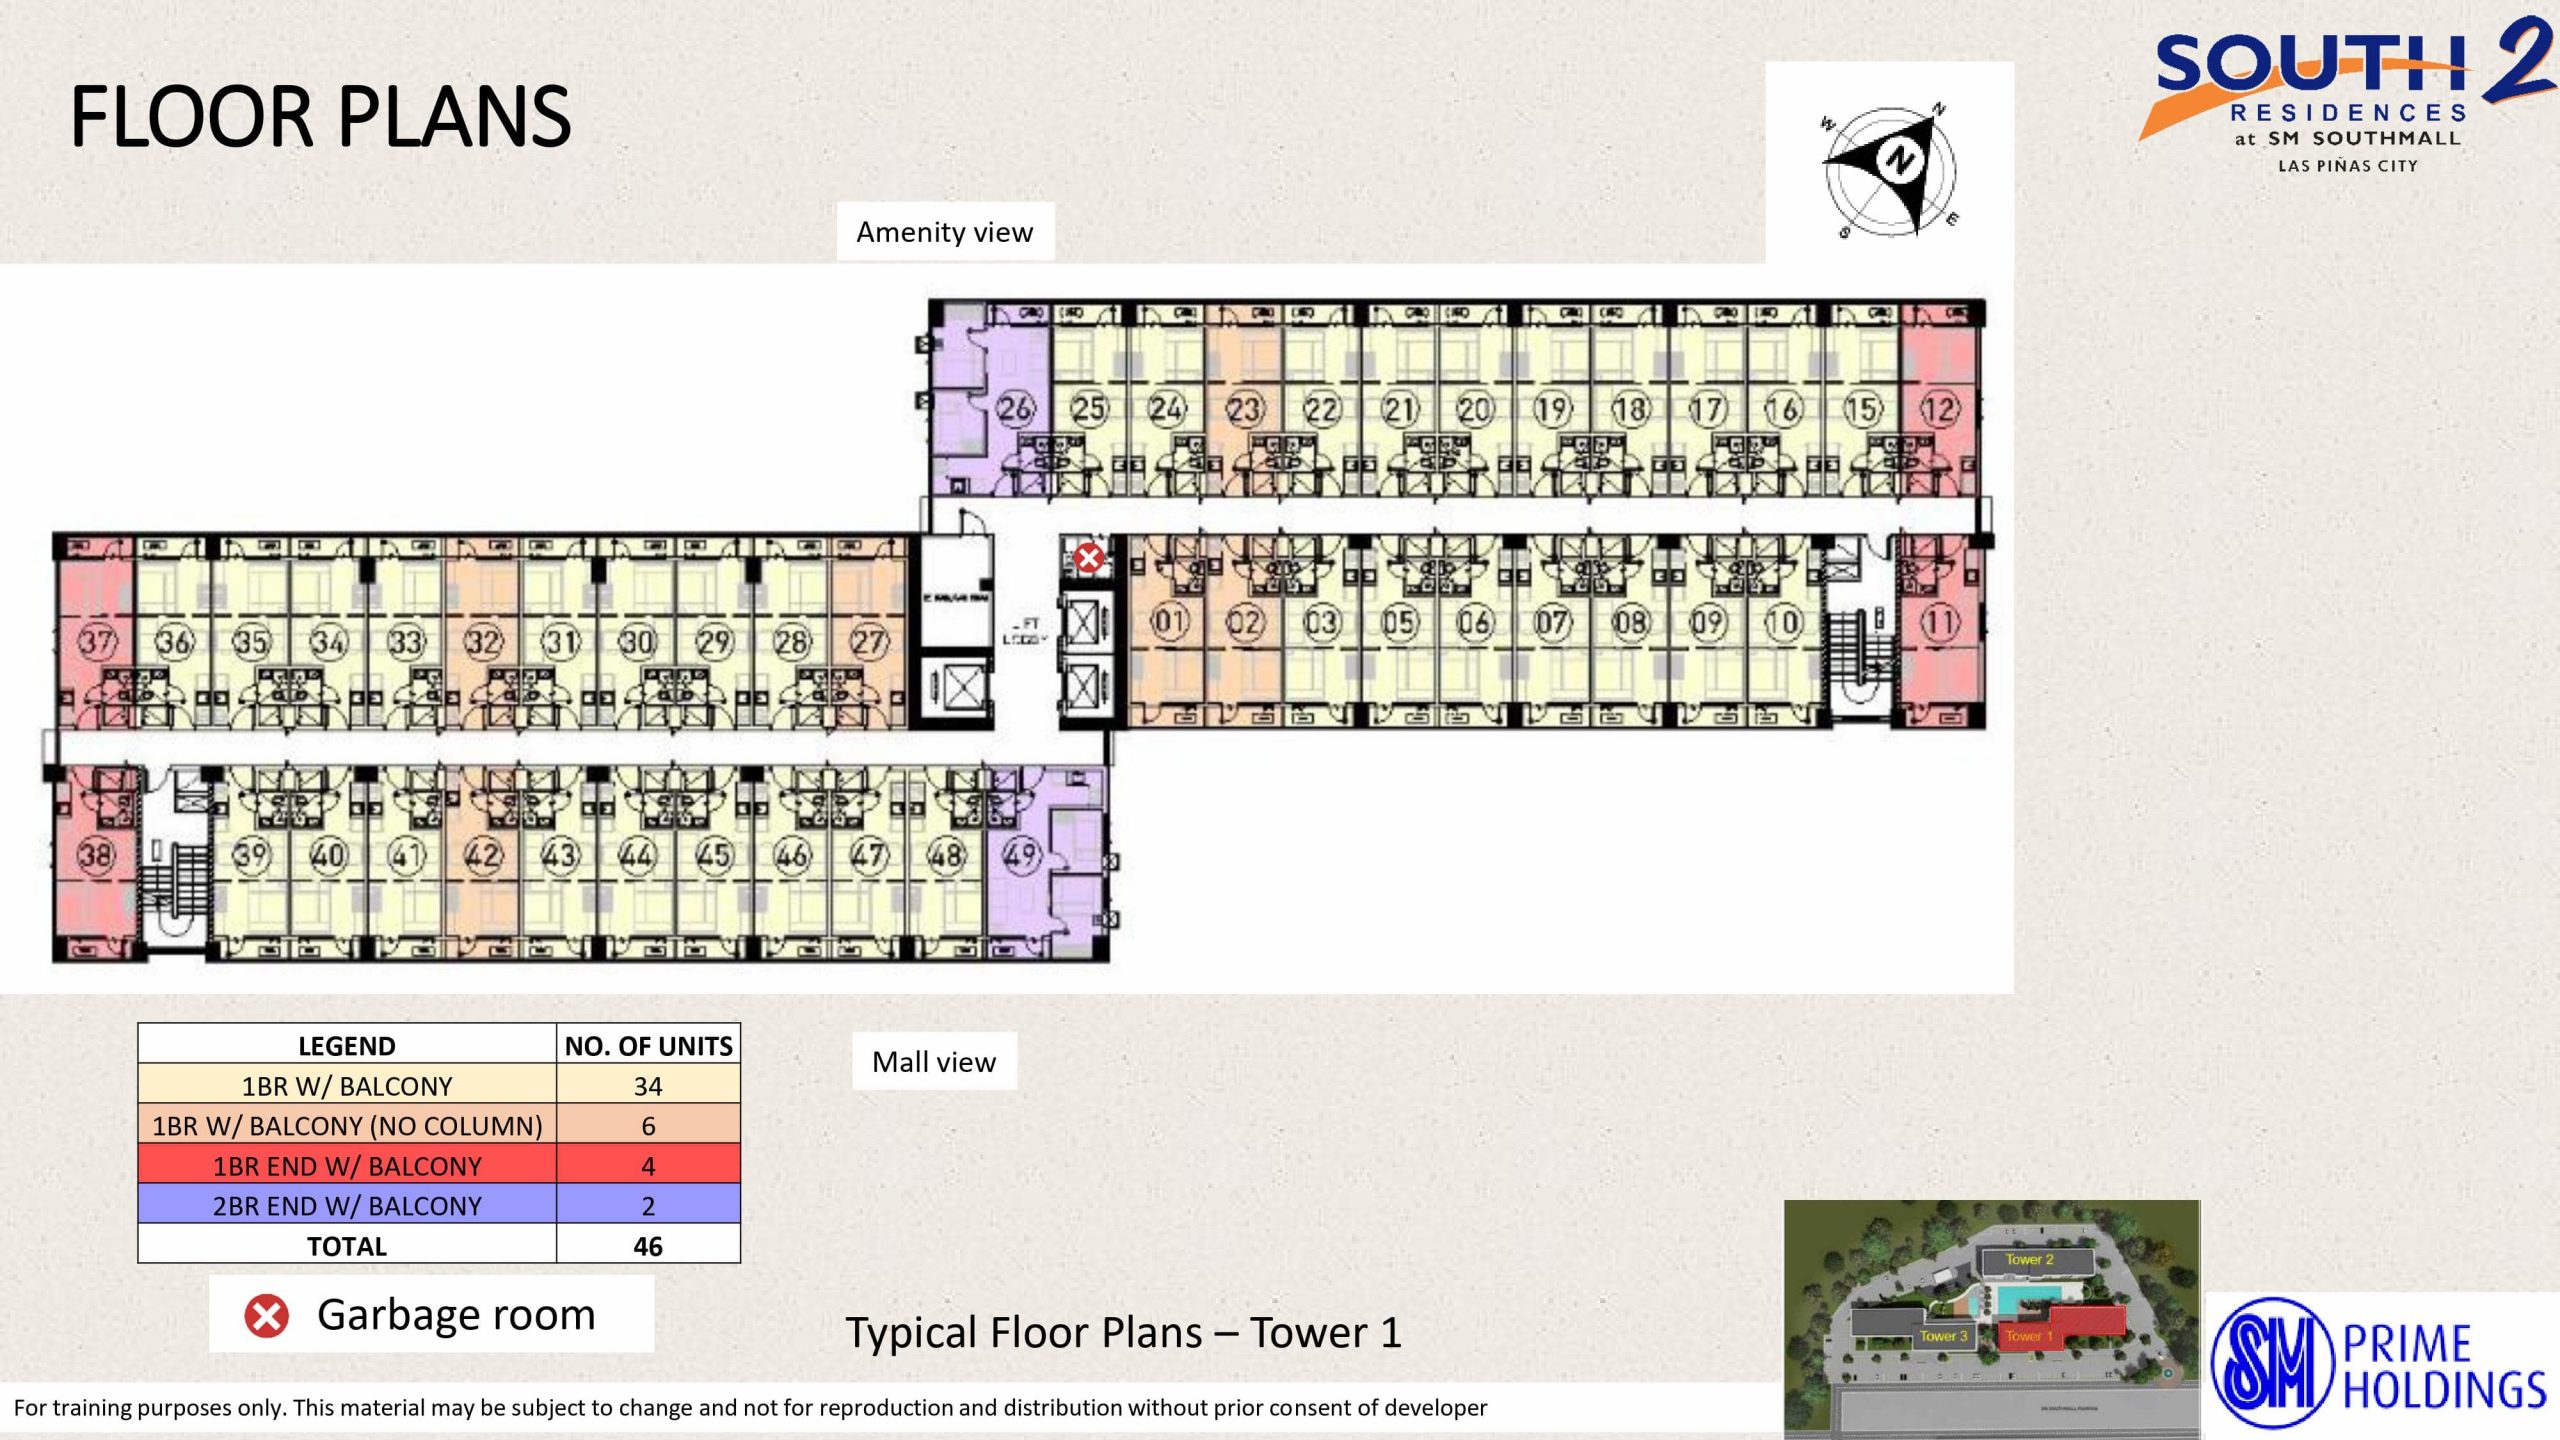 Tower 1 - Typical Floor Plans